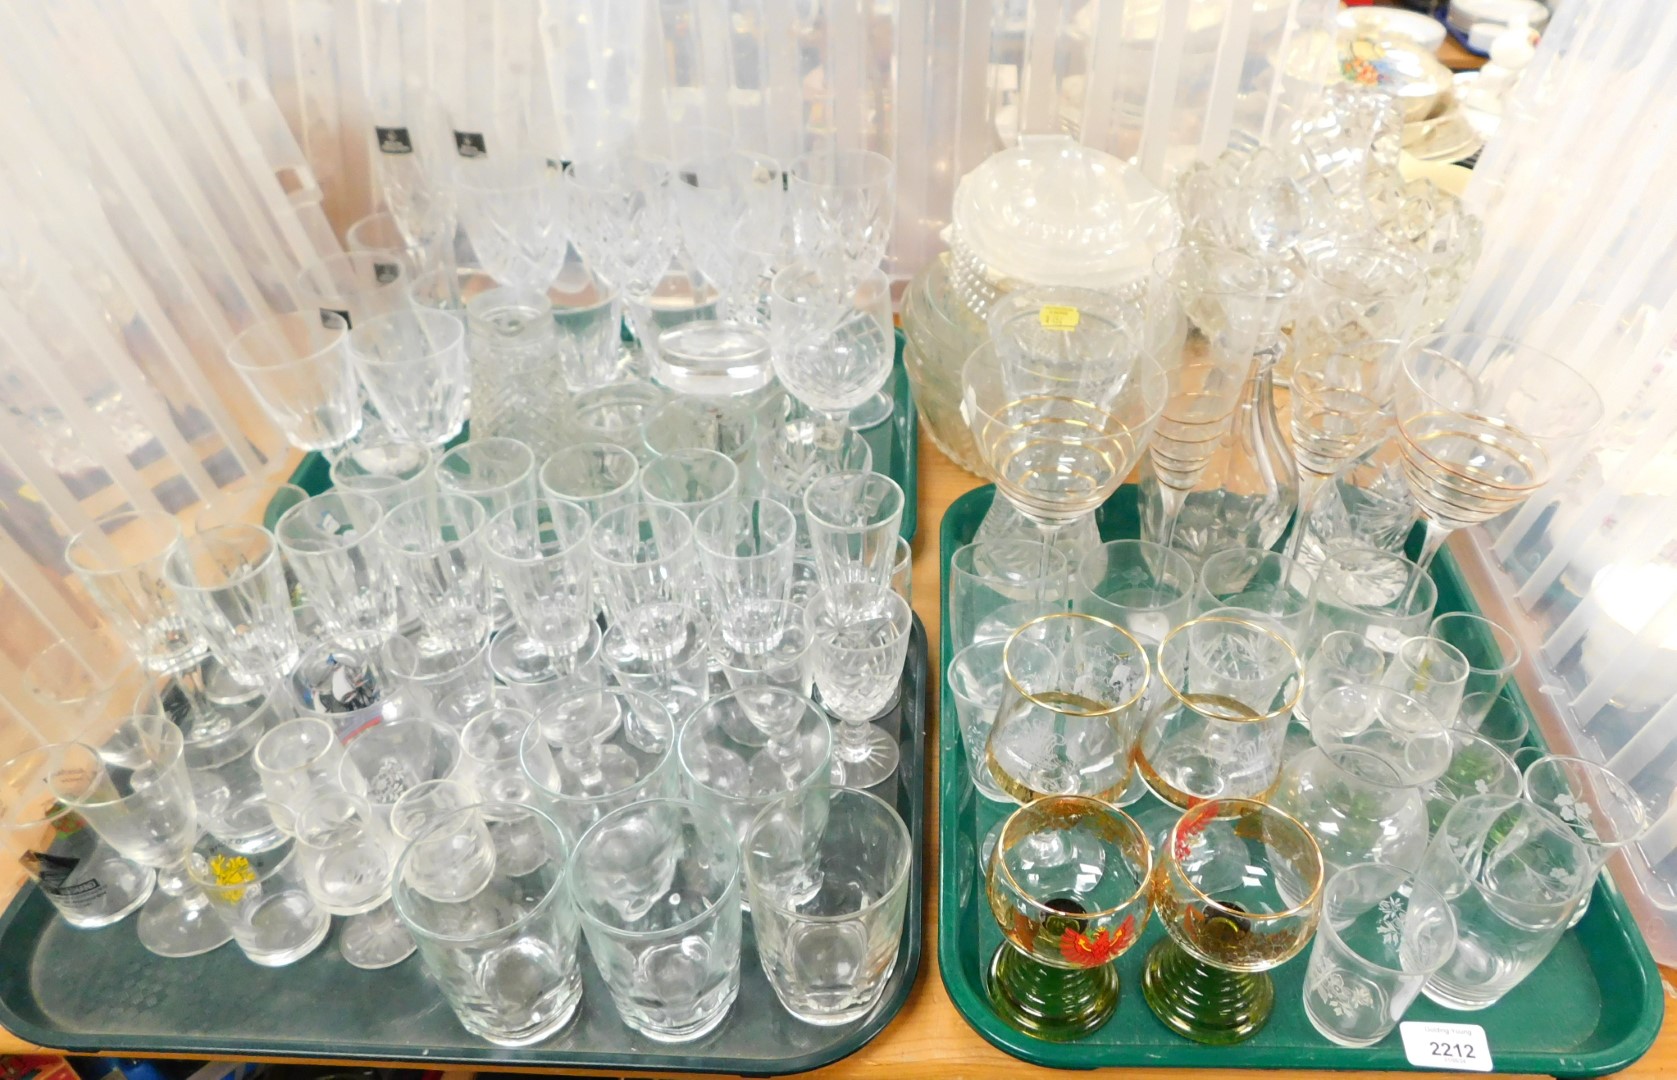 A large selection of glassware, including Royal Doulton drinking glasses, champagne flutes, smaller